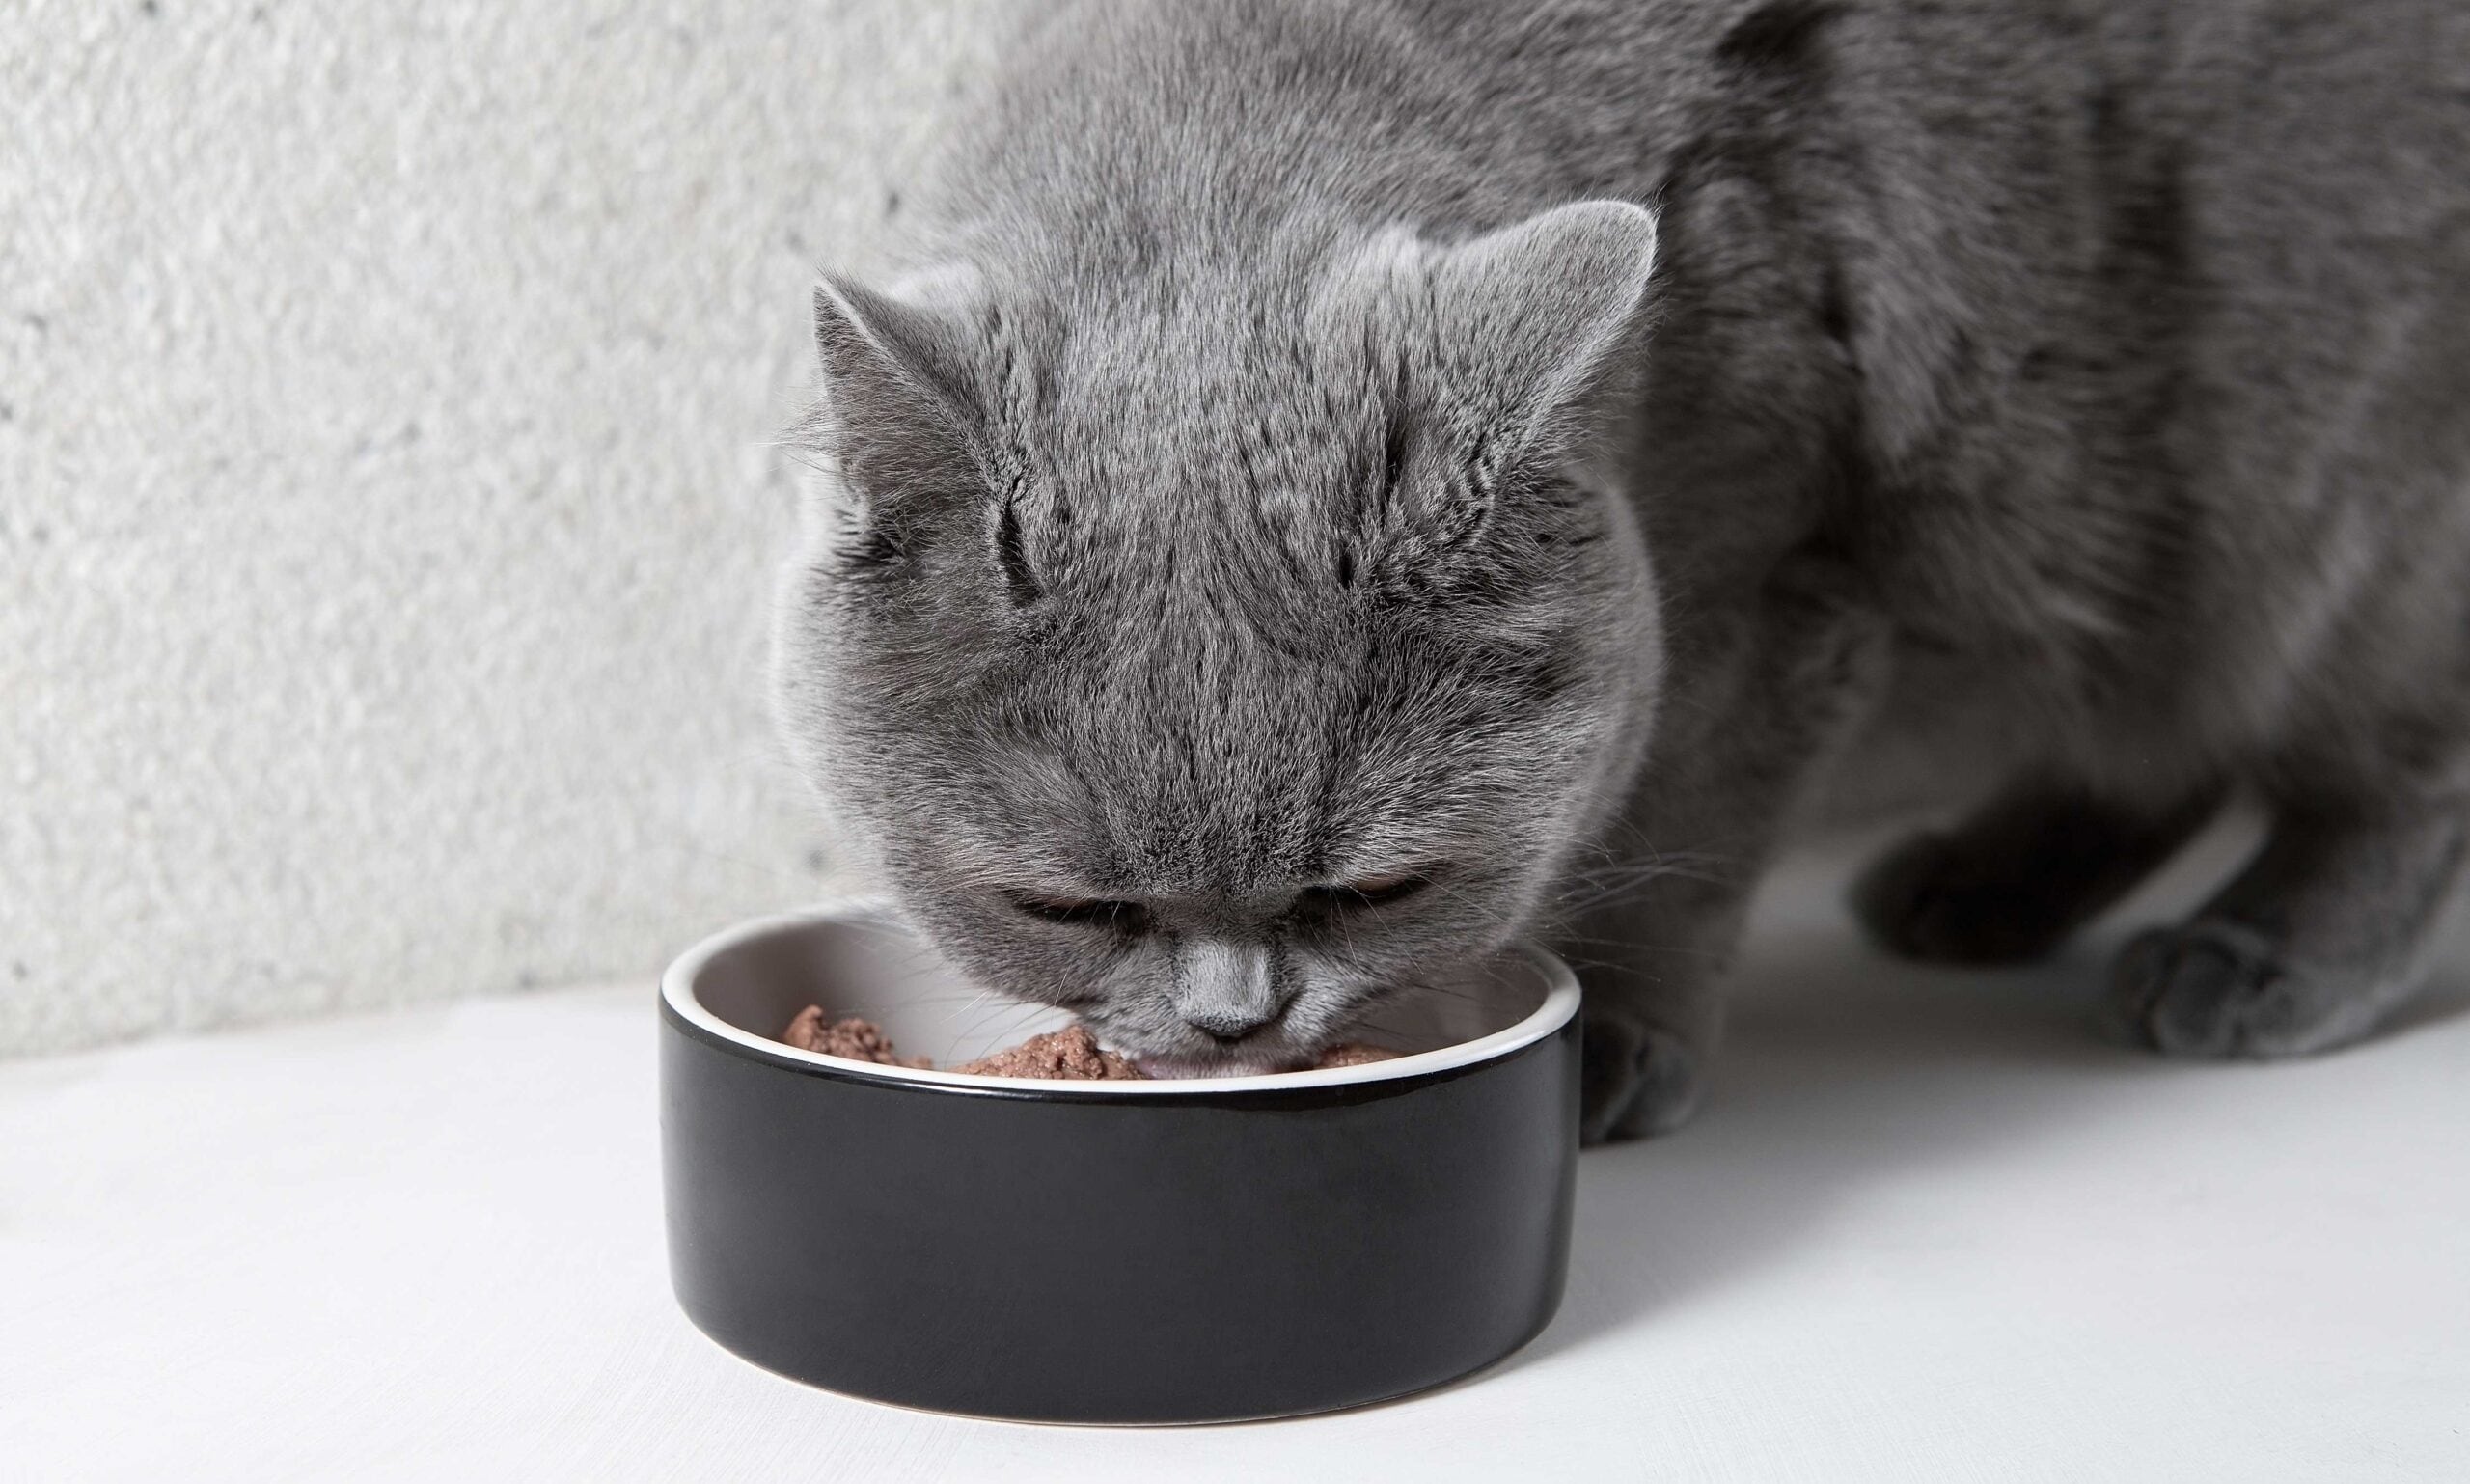 can cats eat dog food: cat eating from food bowl